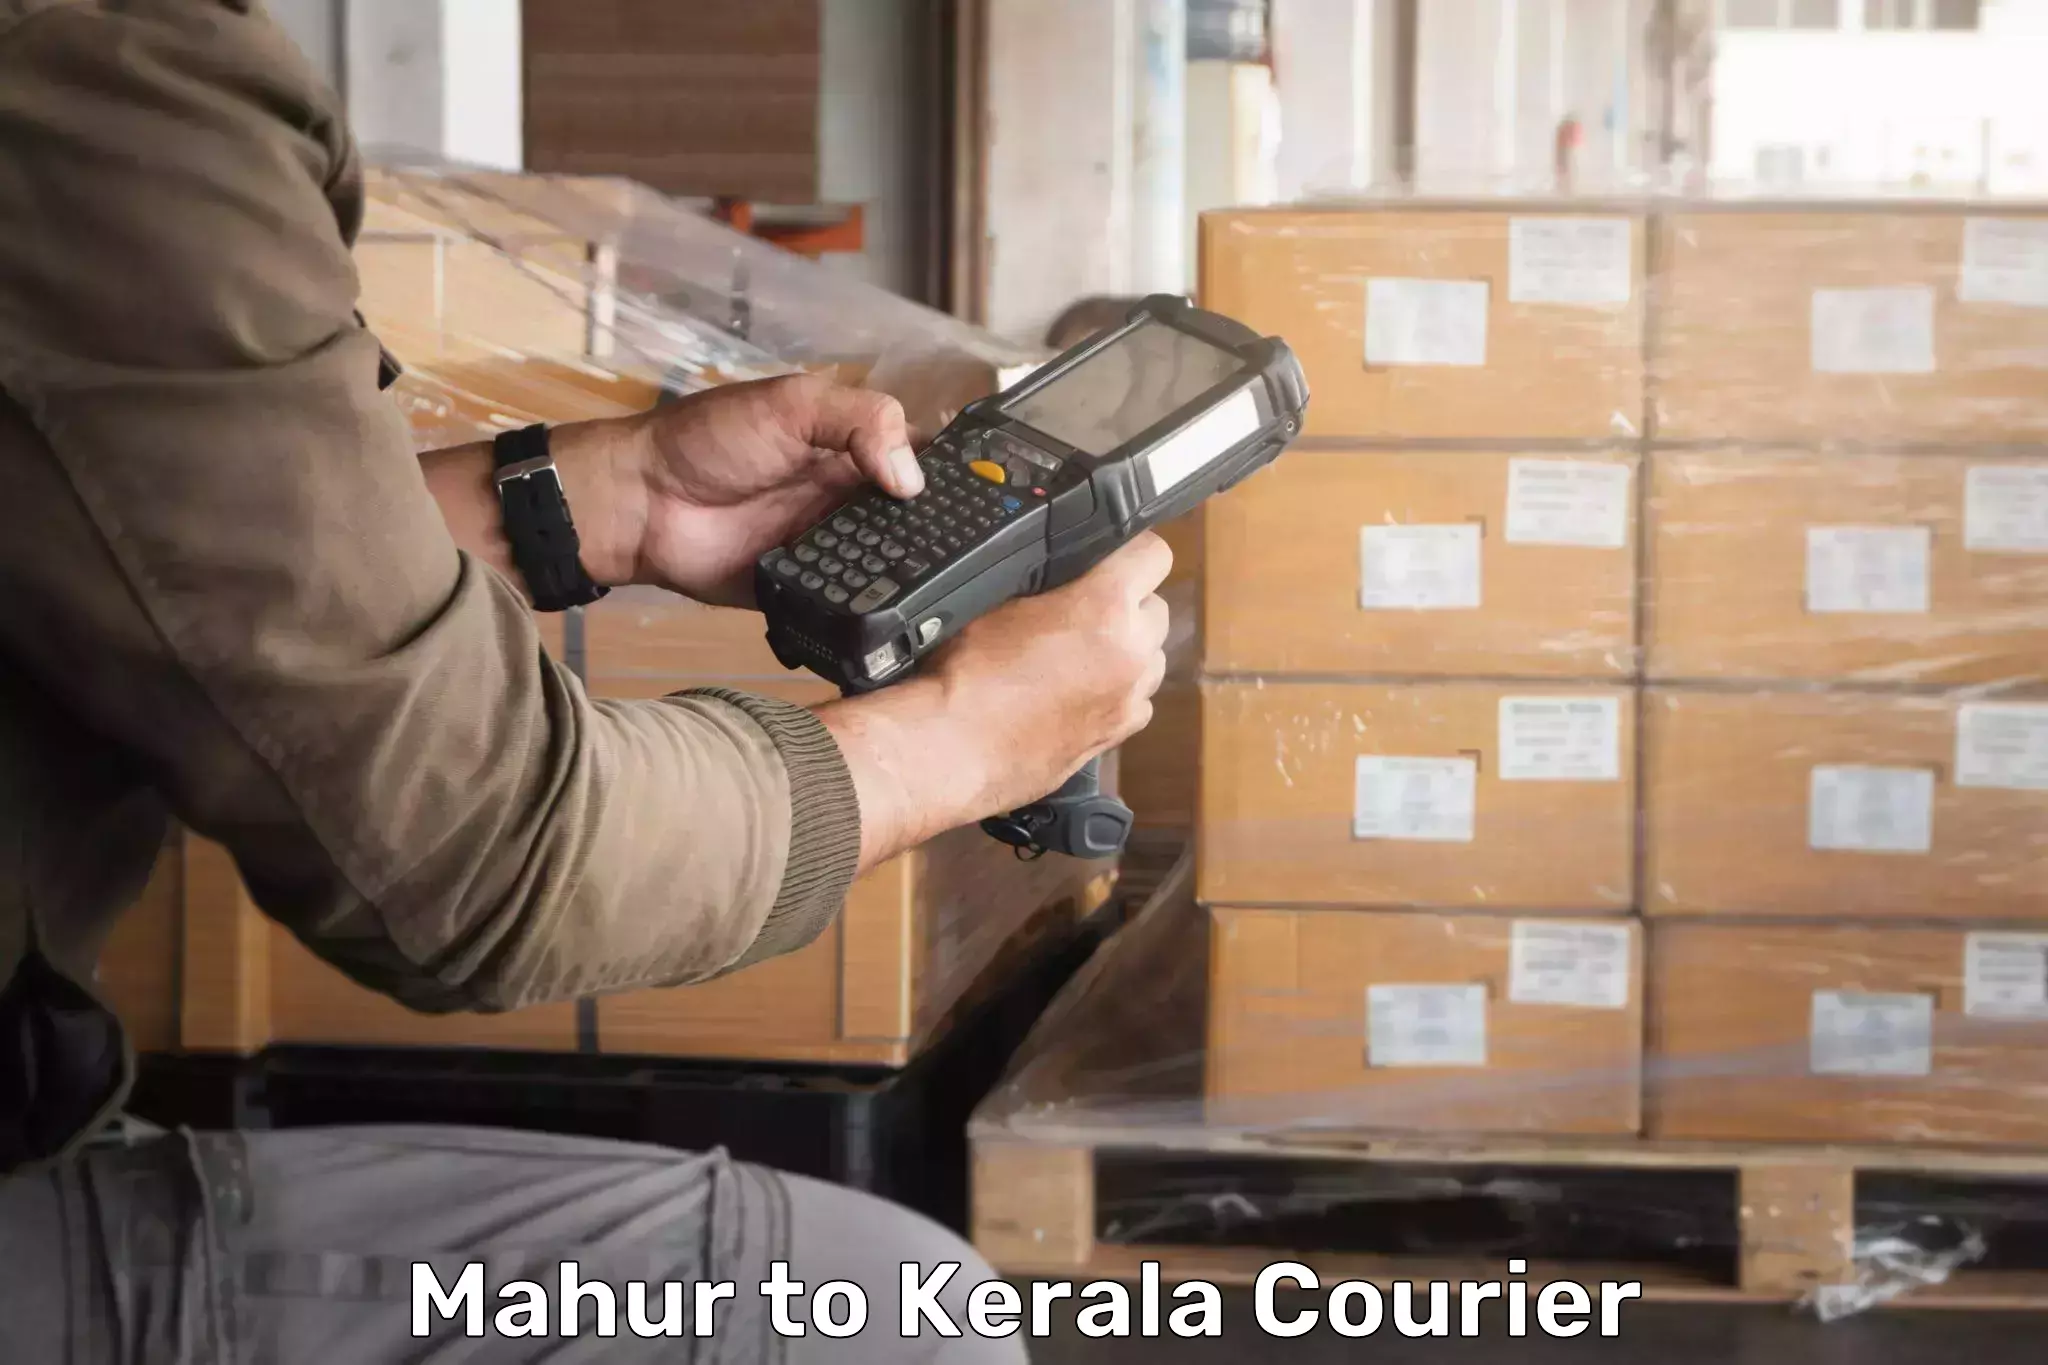 Business delivery service Mahur to Kerala